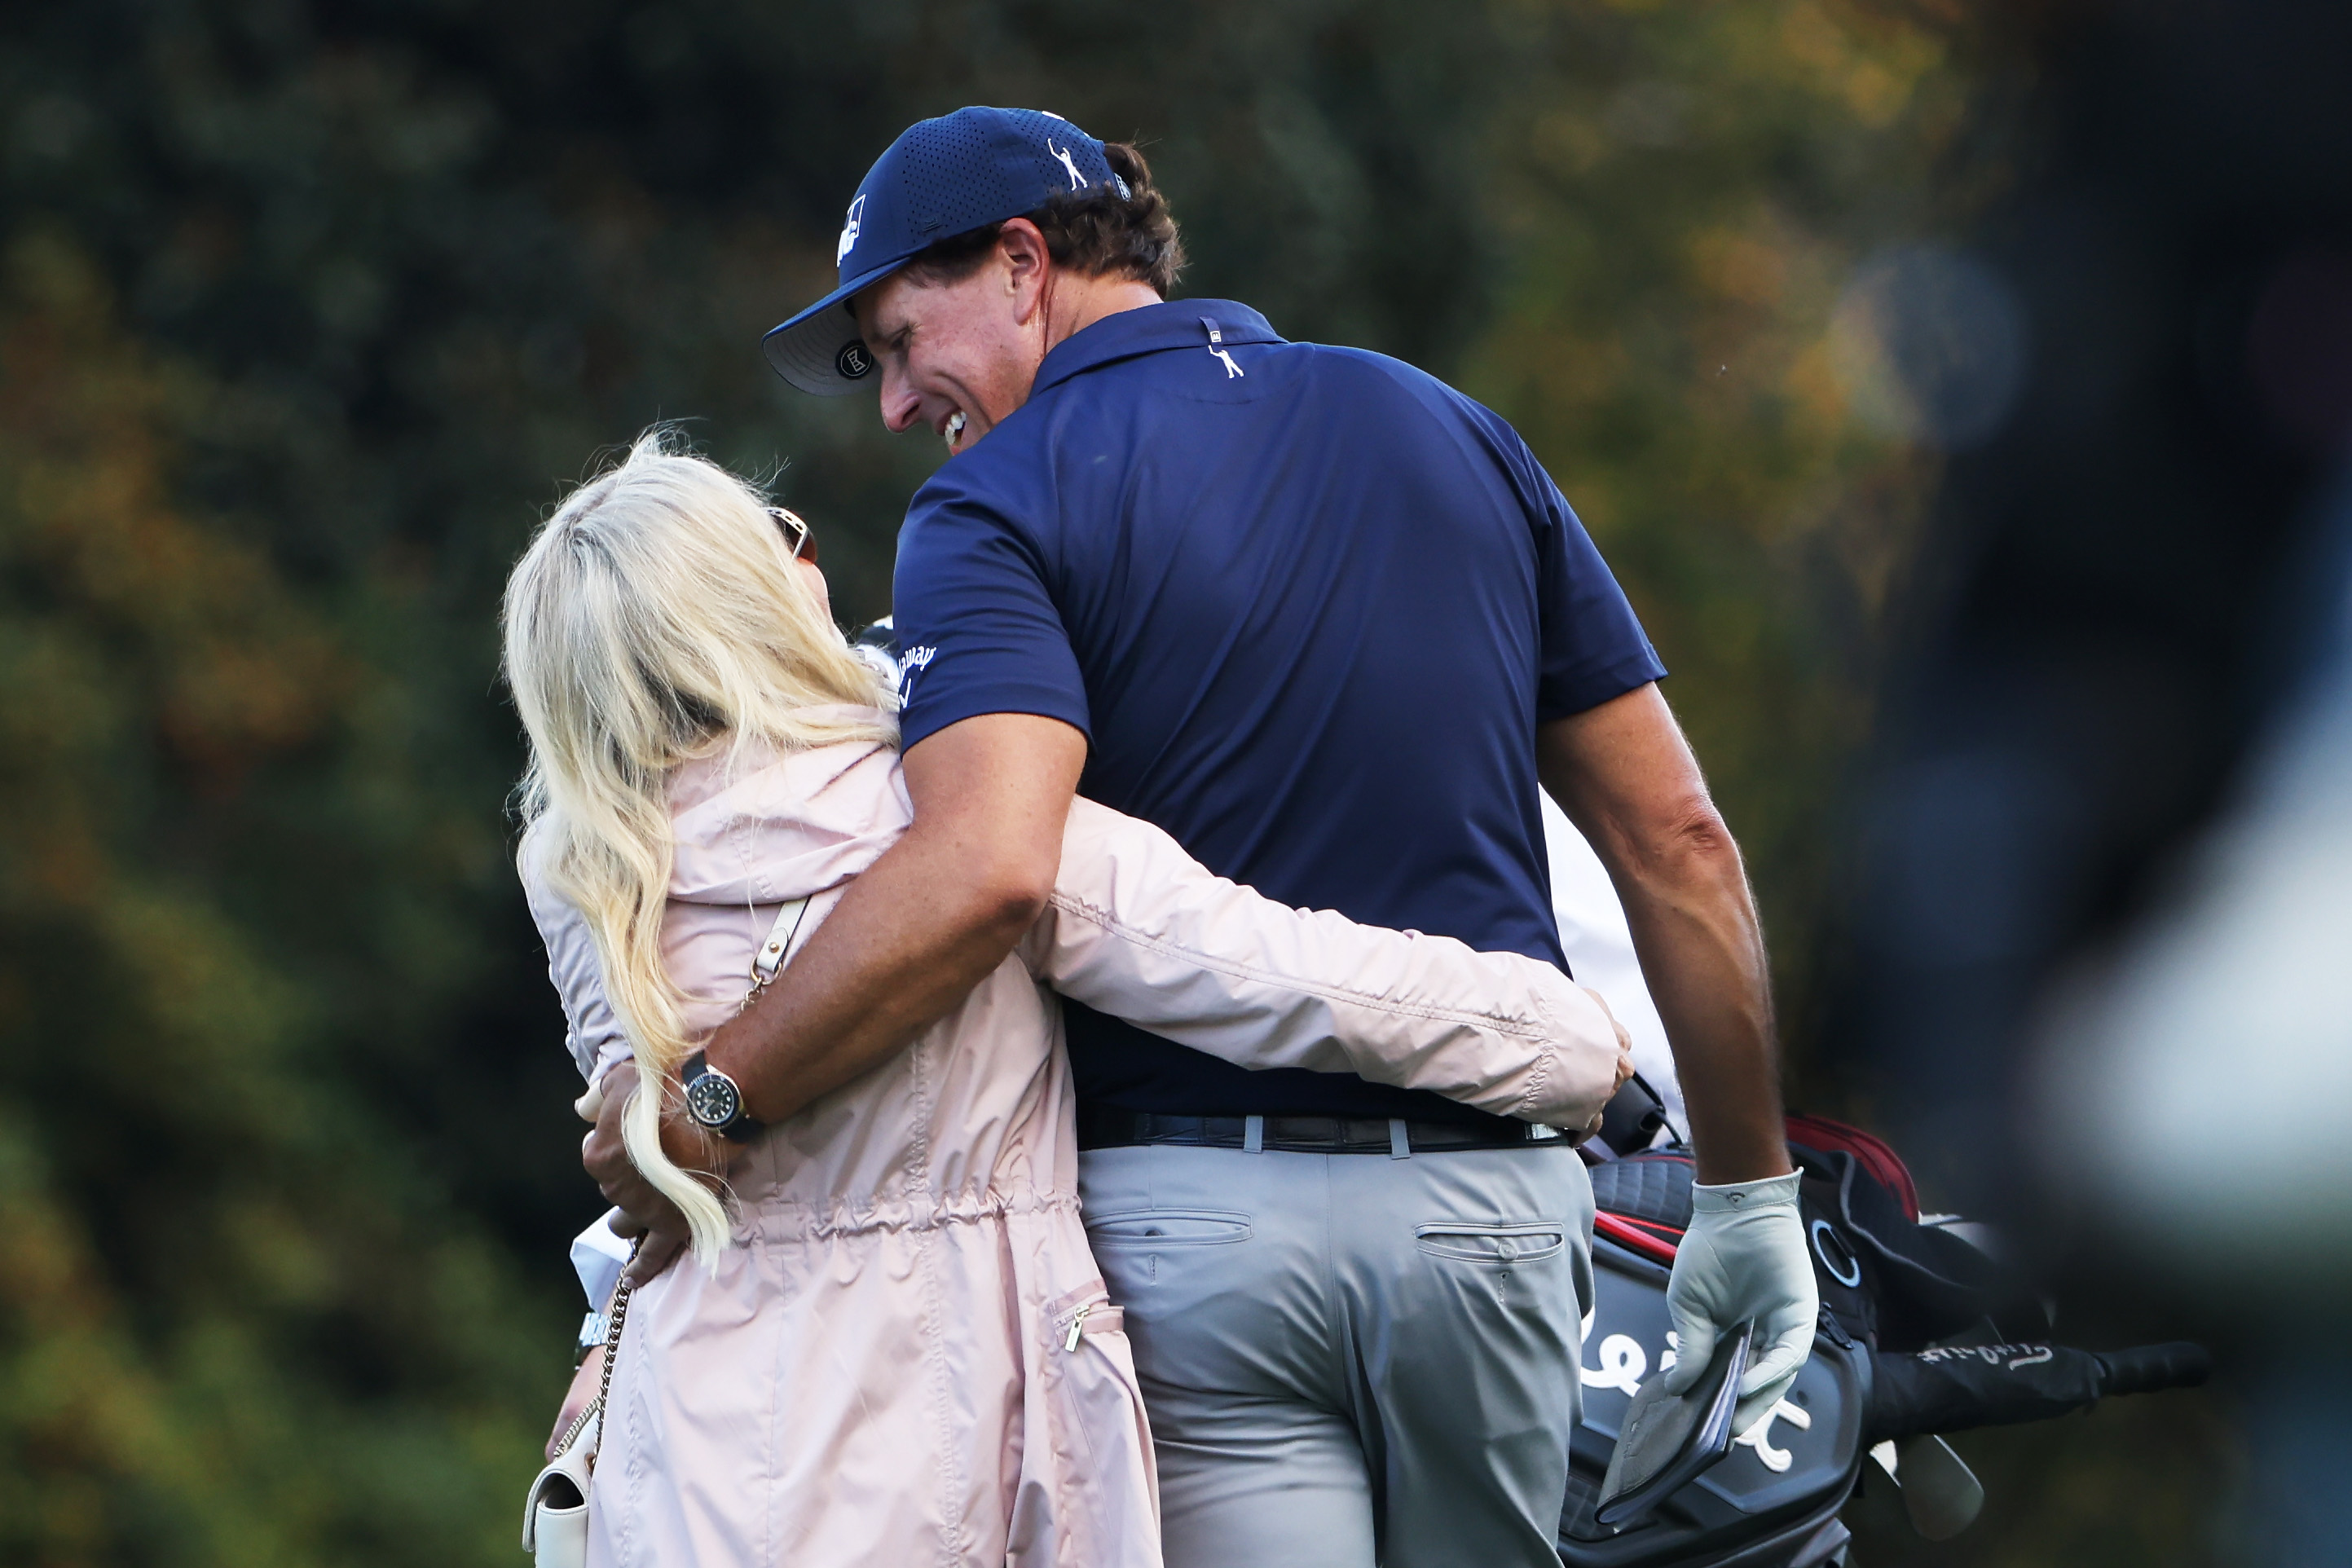 Why is Phil Mickelson not playing in the Masters? pic